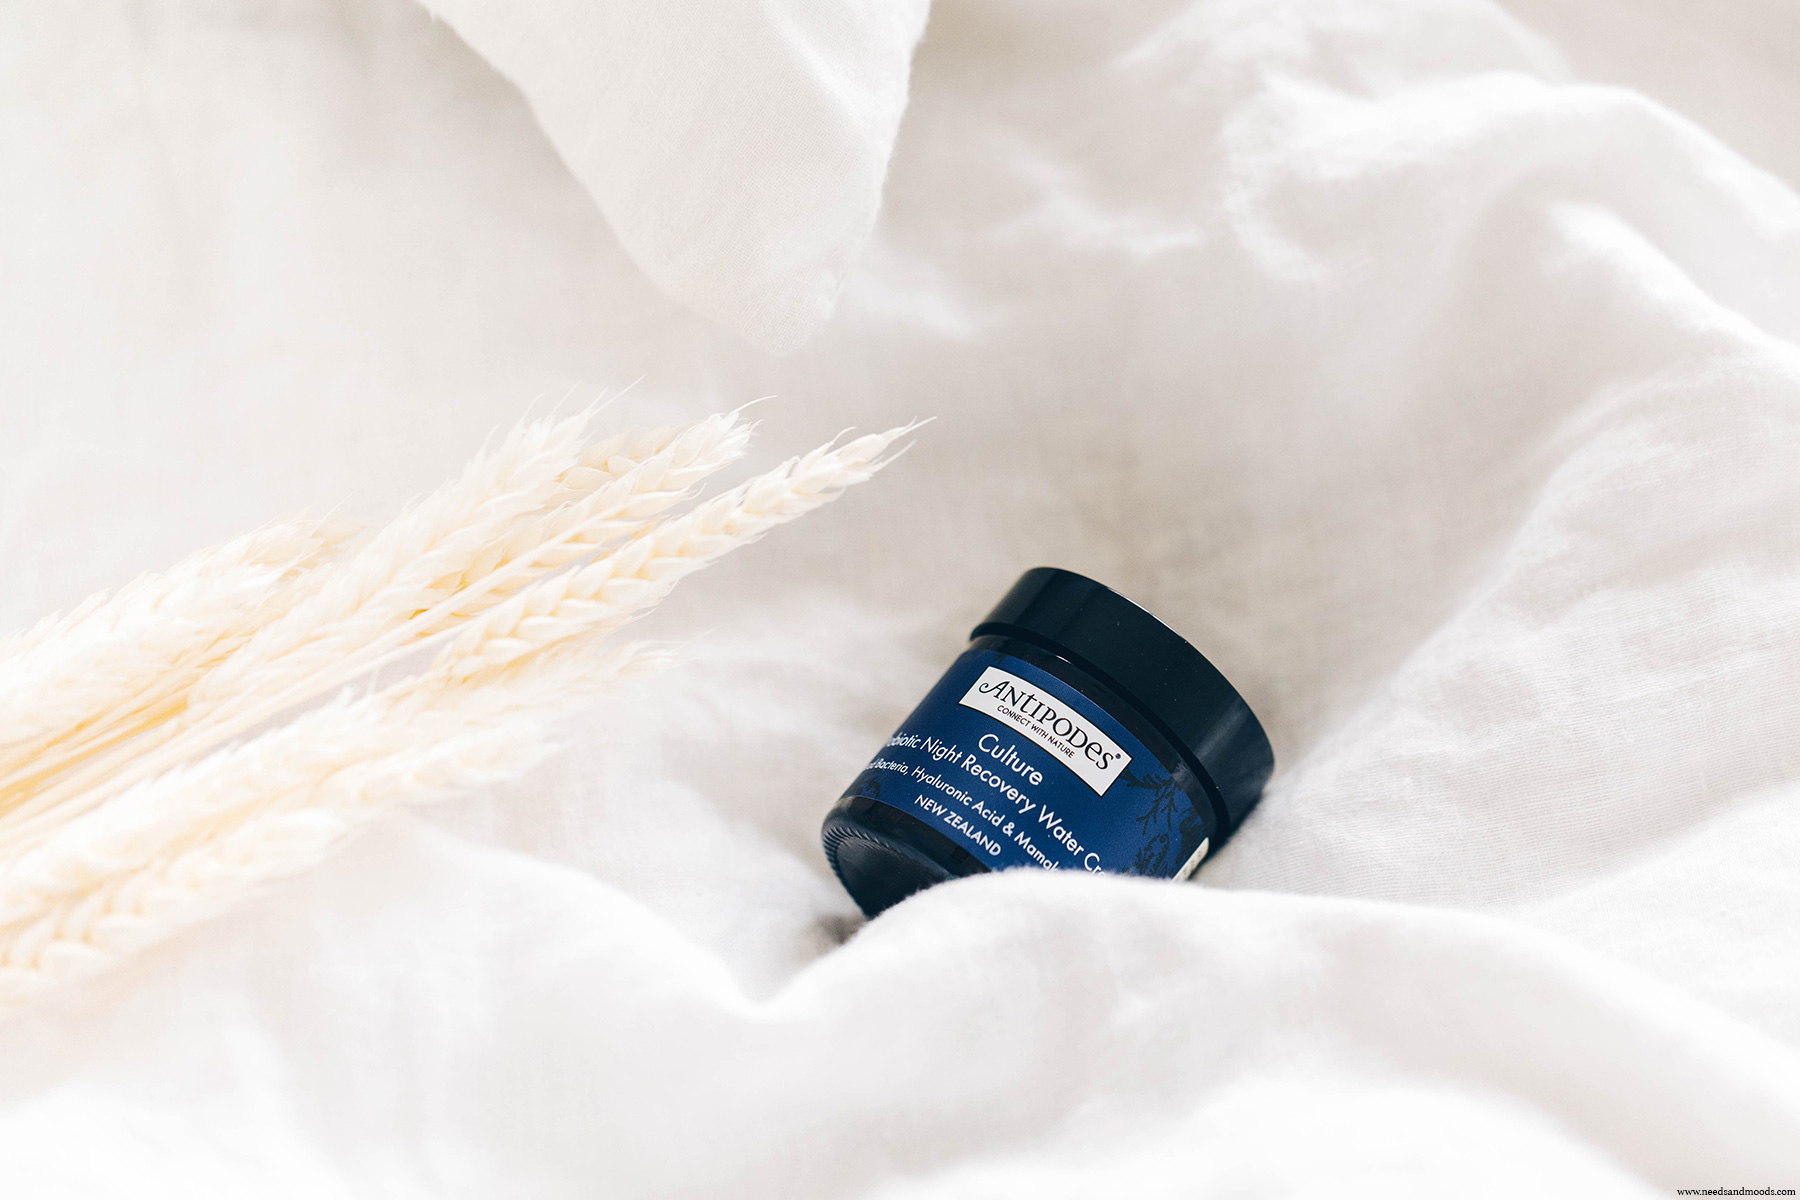 antipodes culture probiotic night recovery water cream avis test